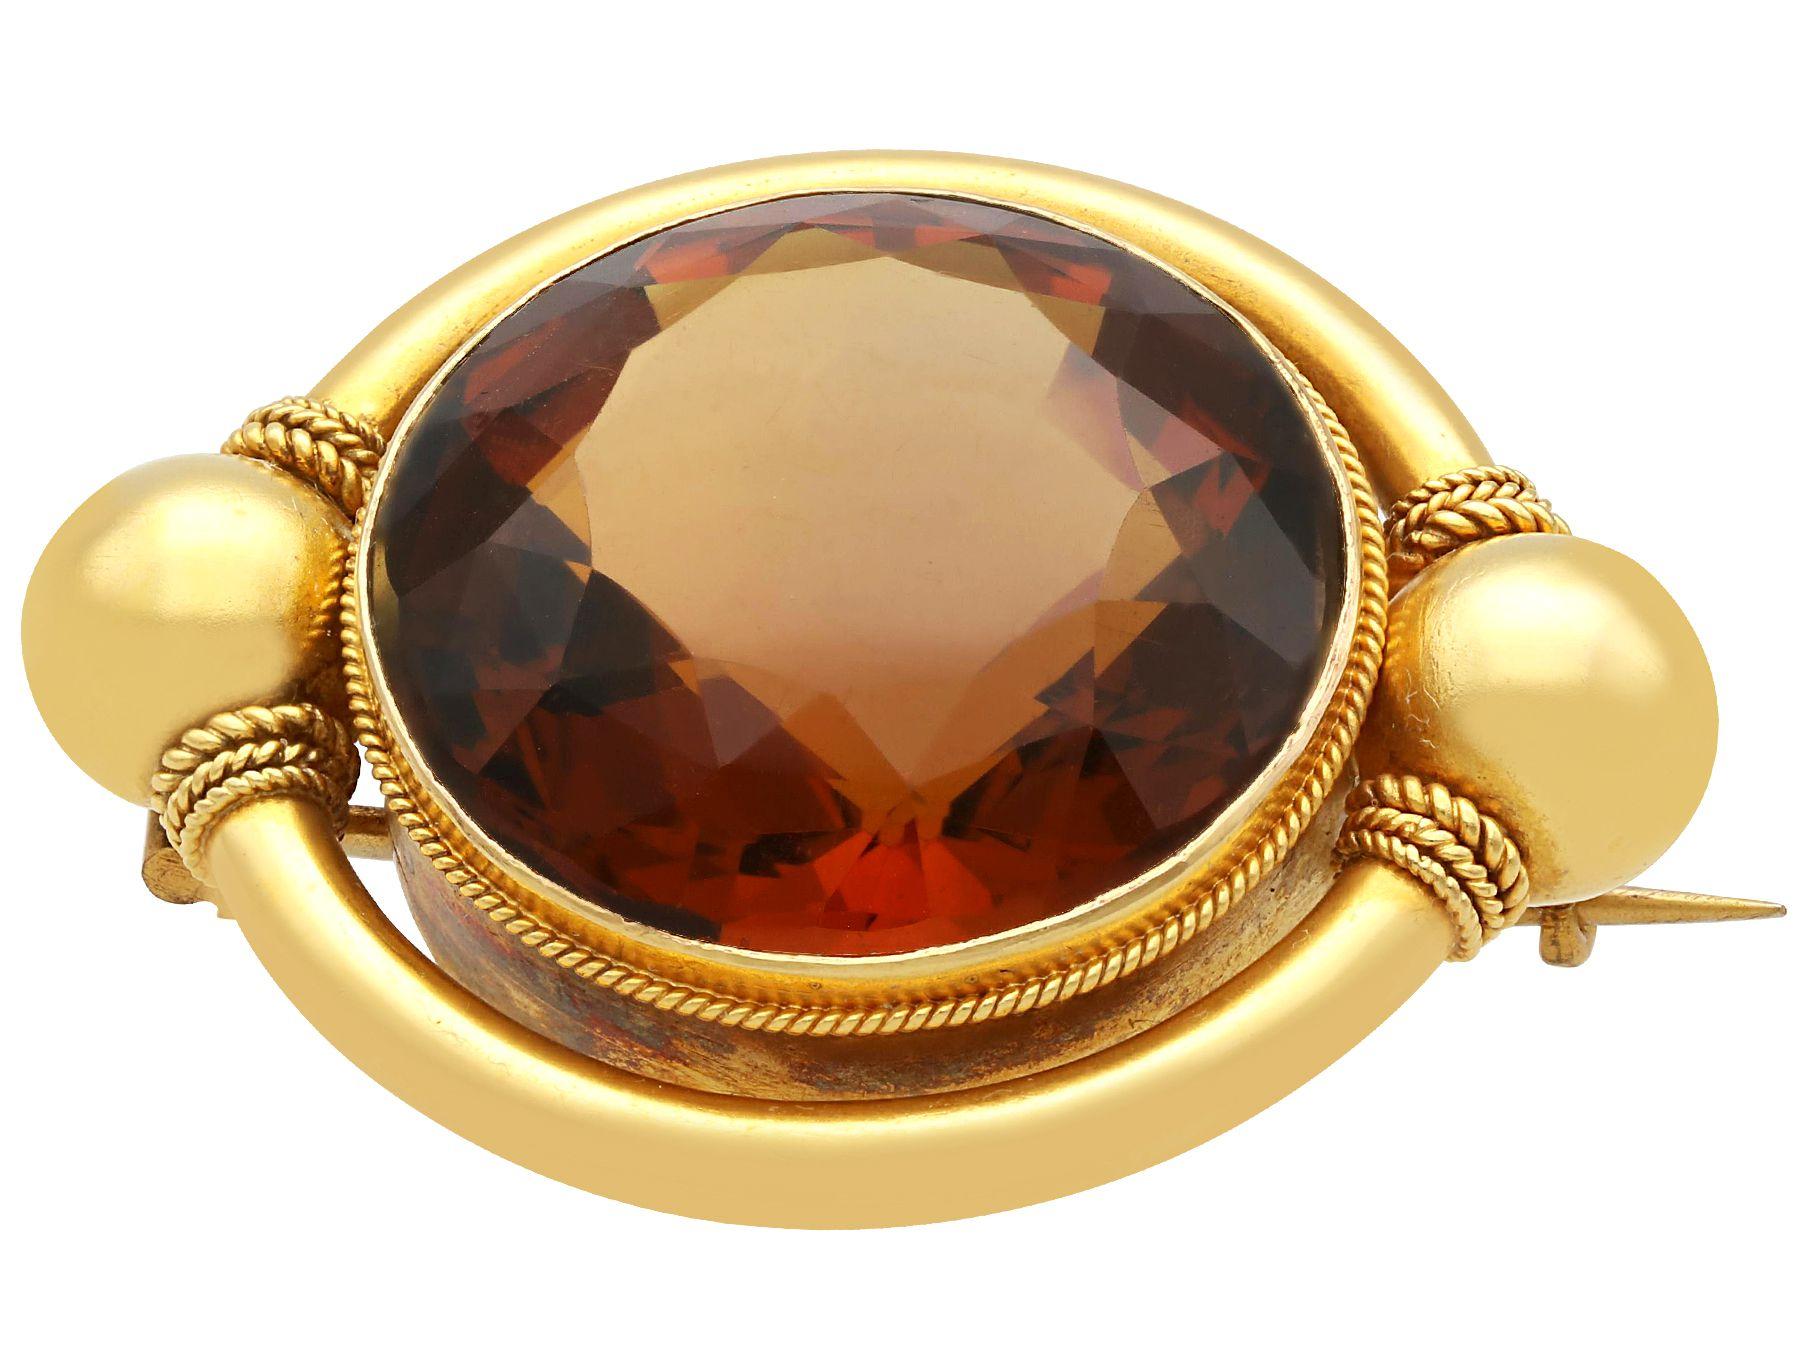 Victorian 44.68 Carat Smoky Quartz and Yellow Gold Brooch In Excellent Condition For Sale In Jesmond, Newcastle Upon Tyne